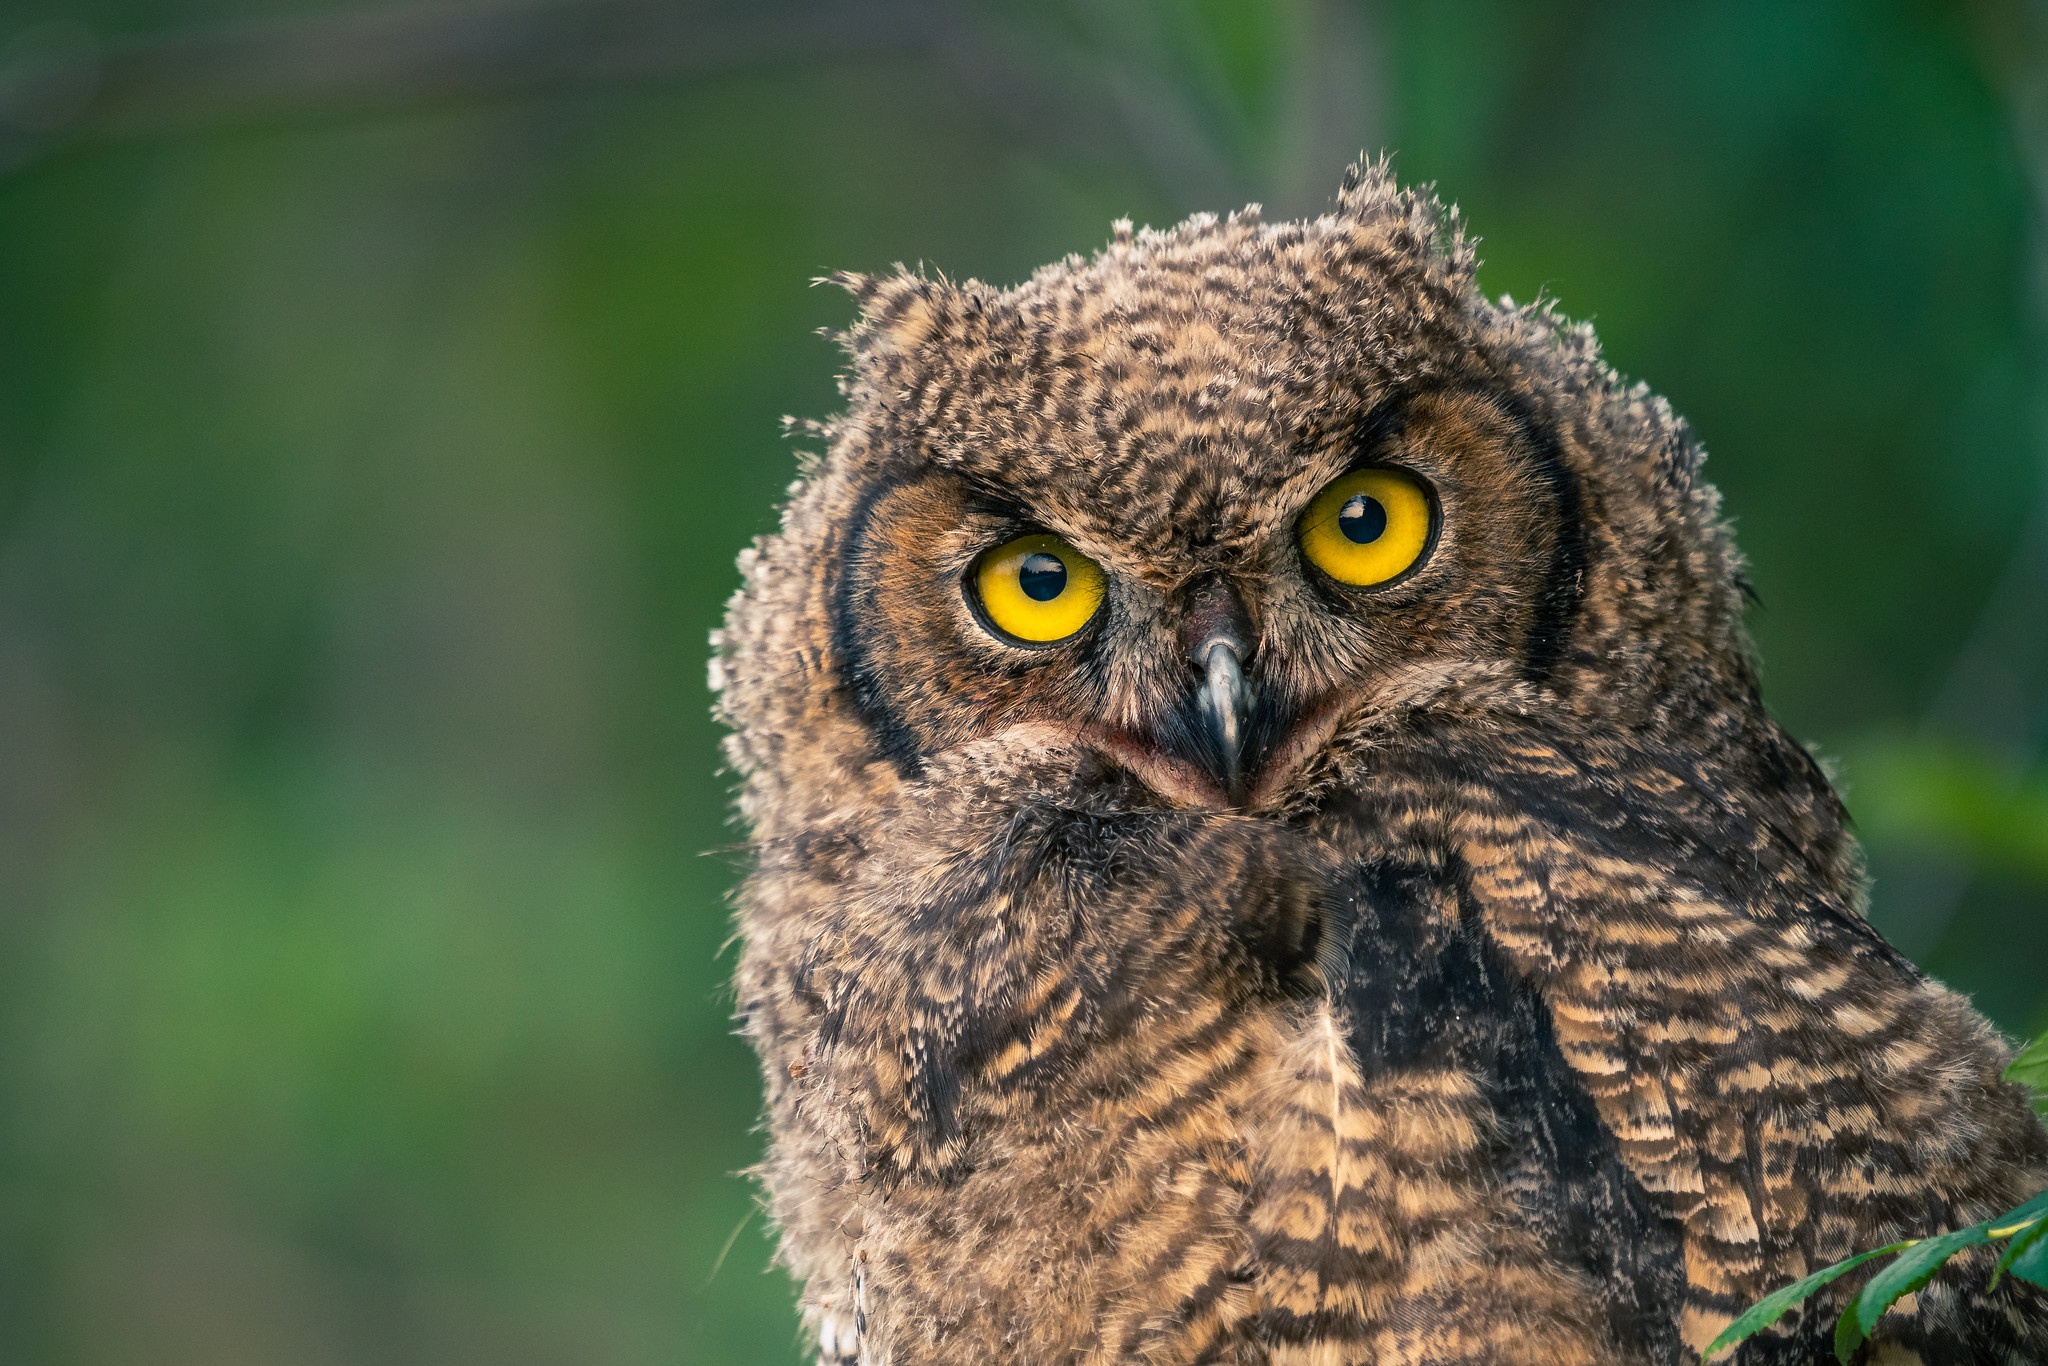 General 2048x1366 animals birds owl yellow eyes closeup looking at viewer blurred blurry background fur